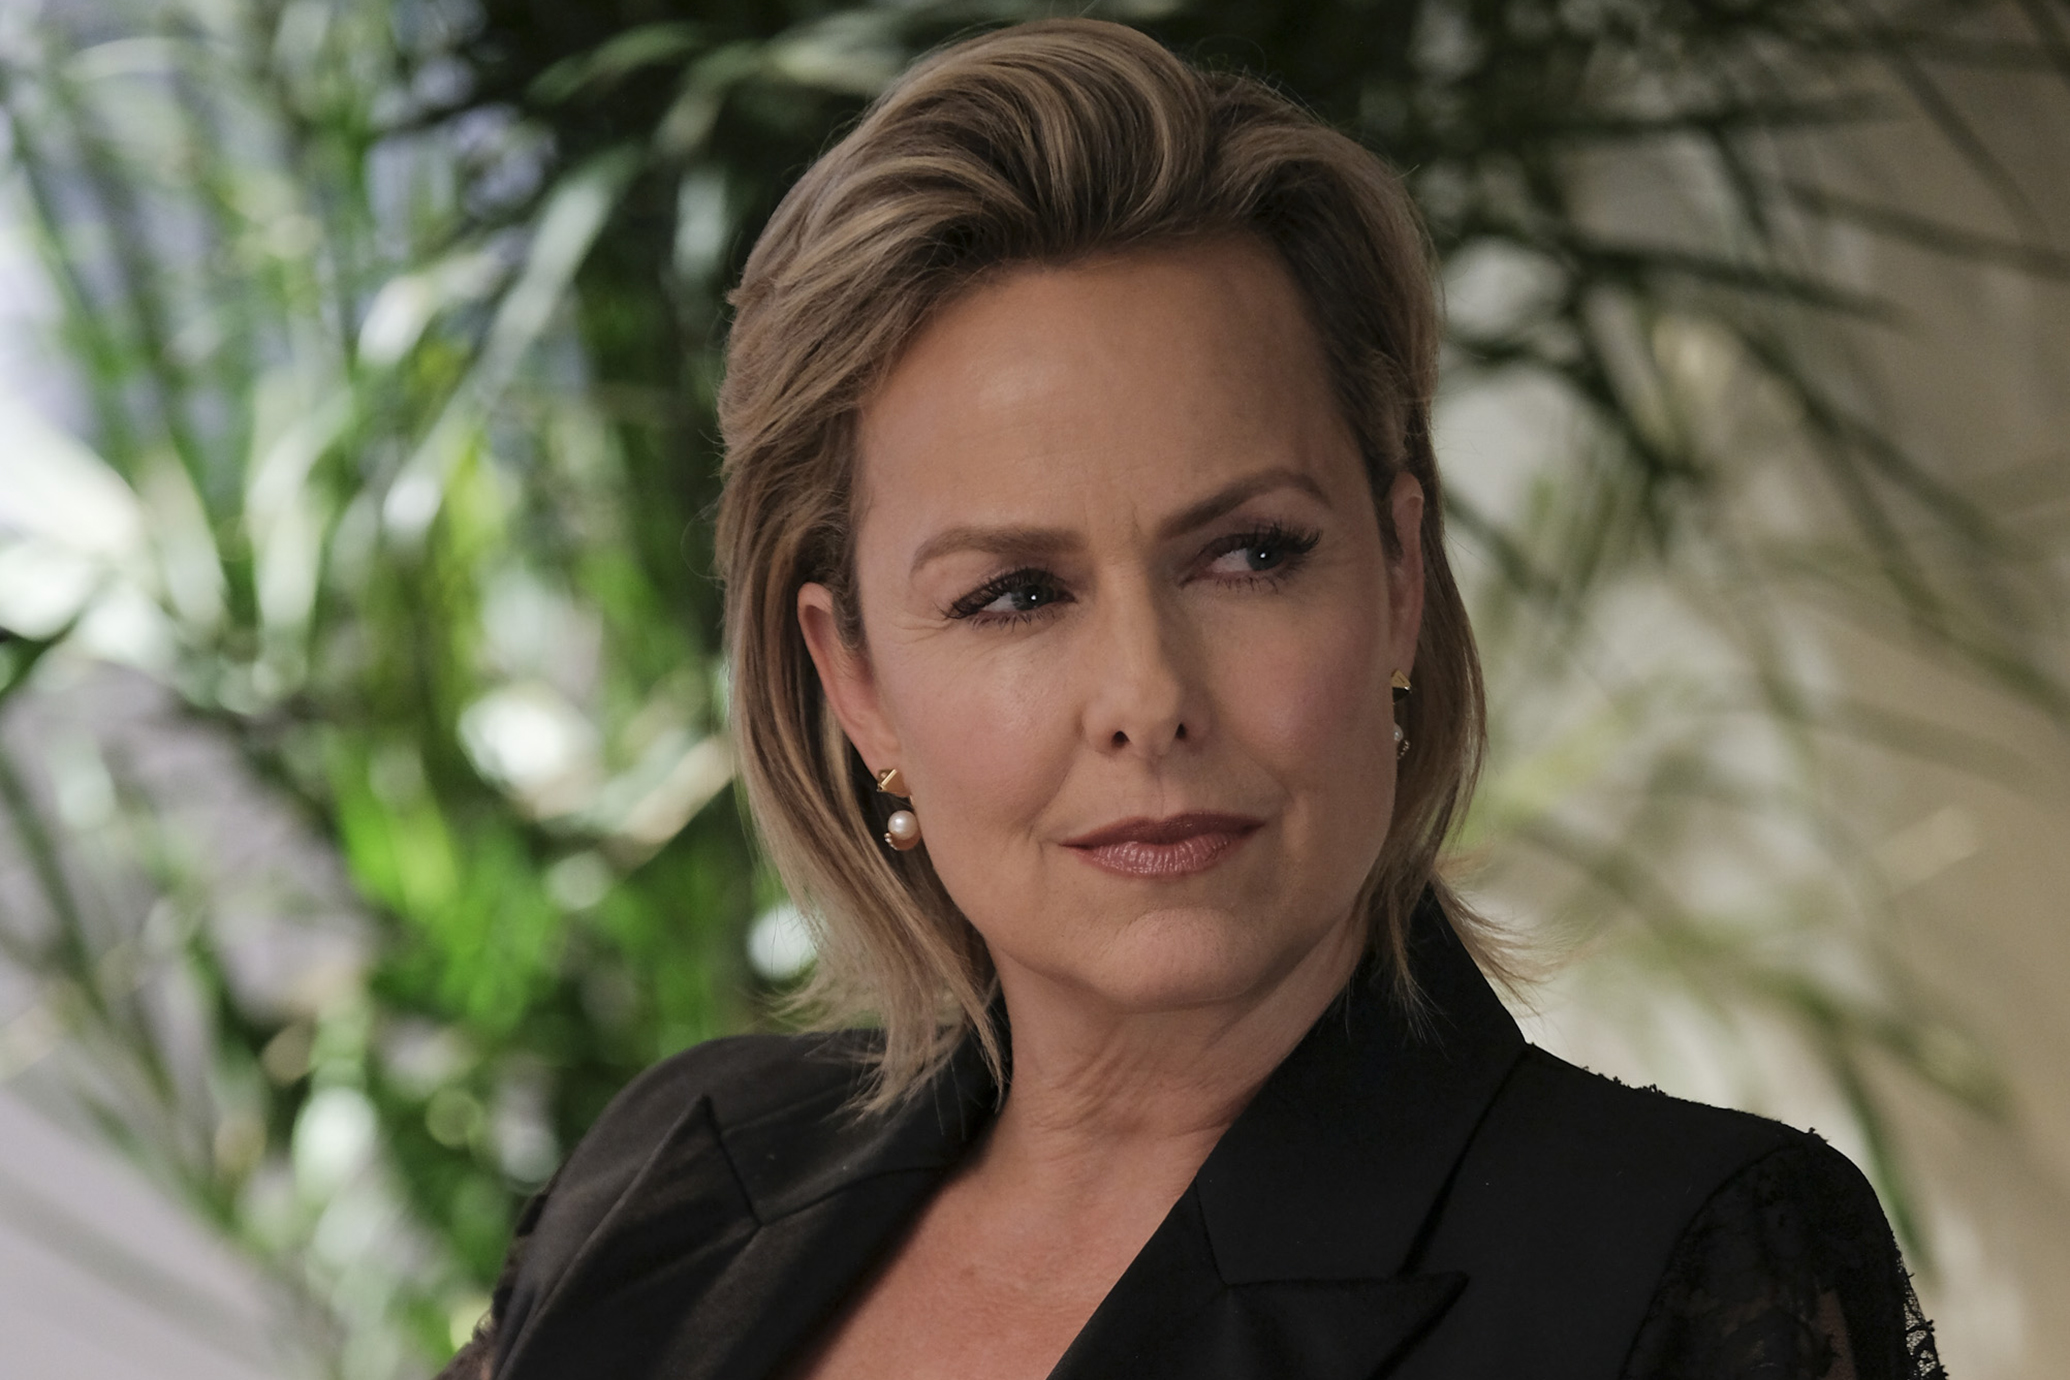 Melora Hardin as Jacqueline Carlyle